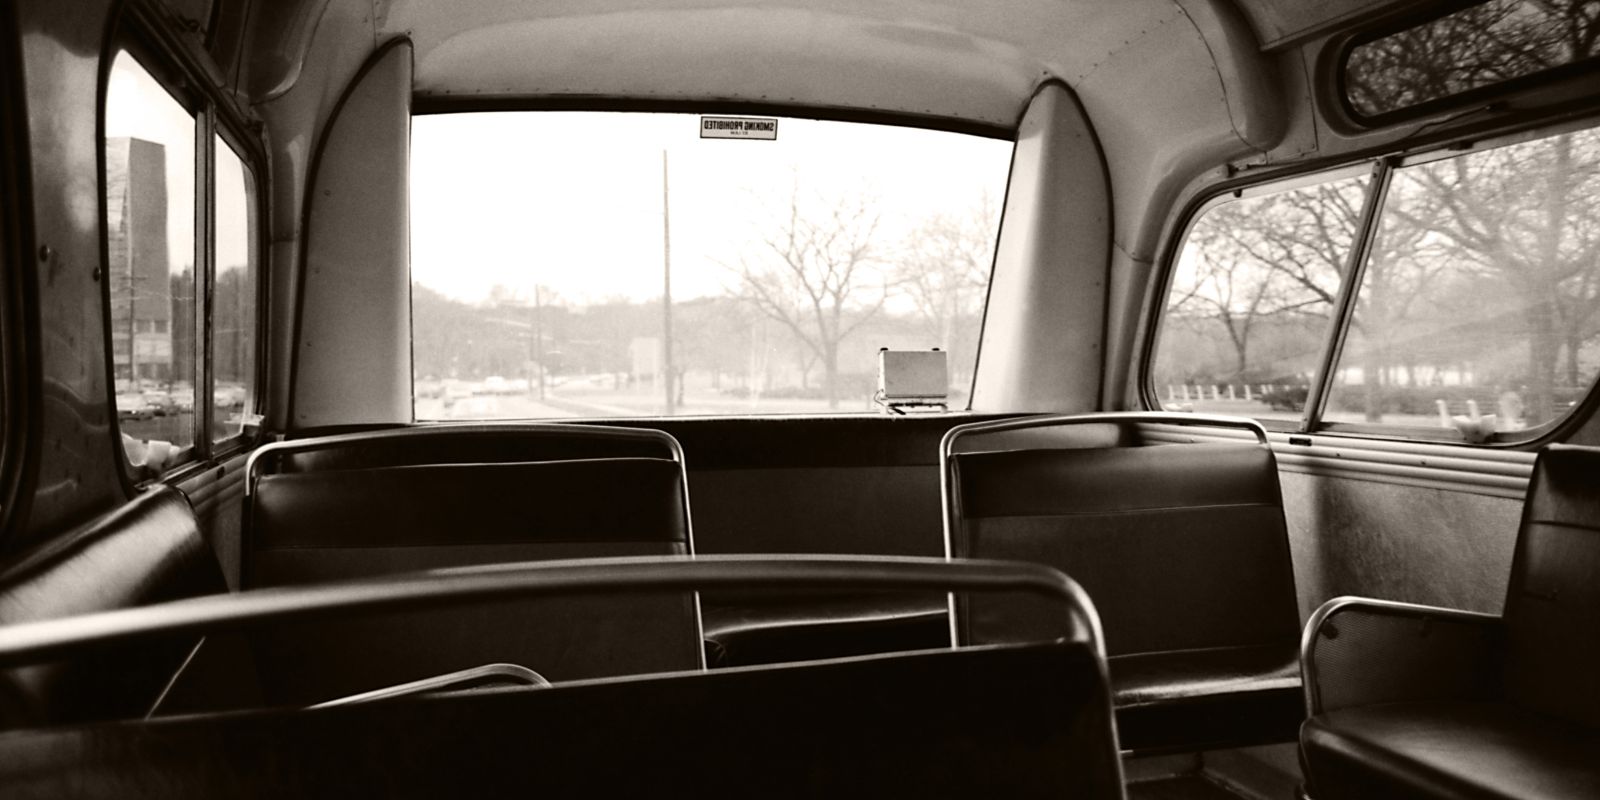 December 1st: The Day Rosa Parks Refused To Move